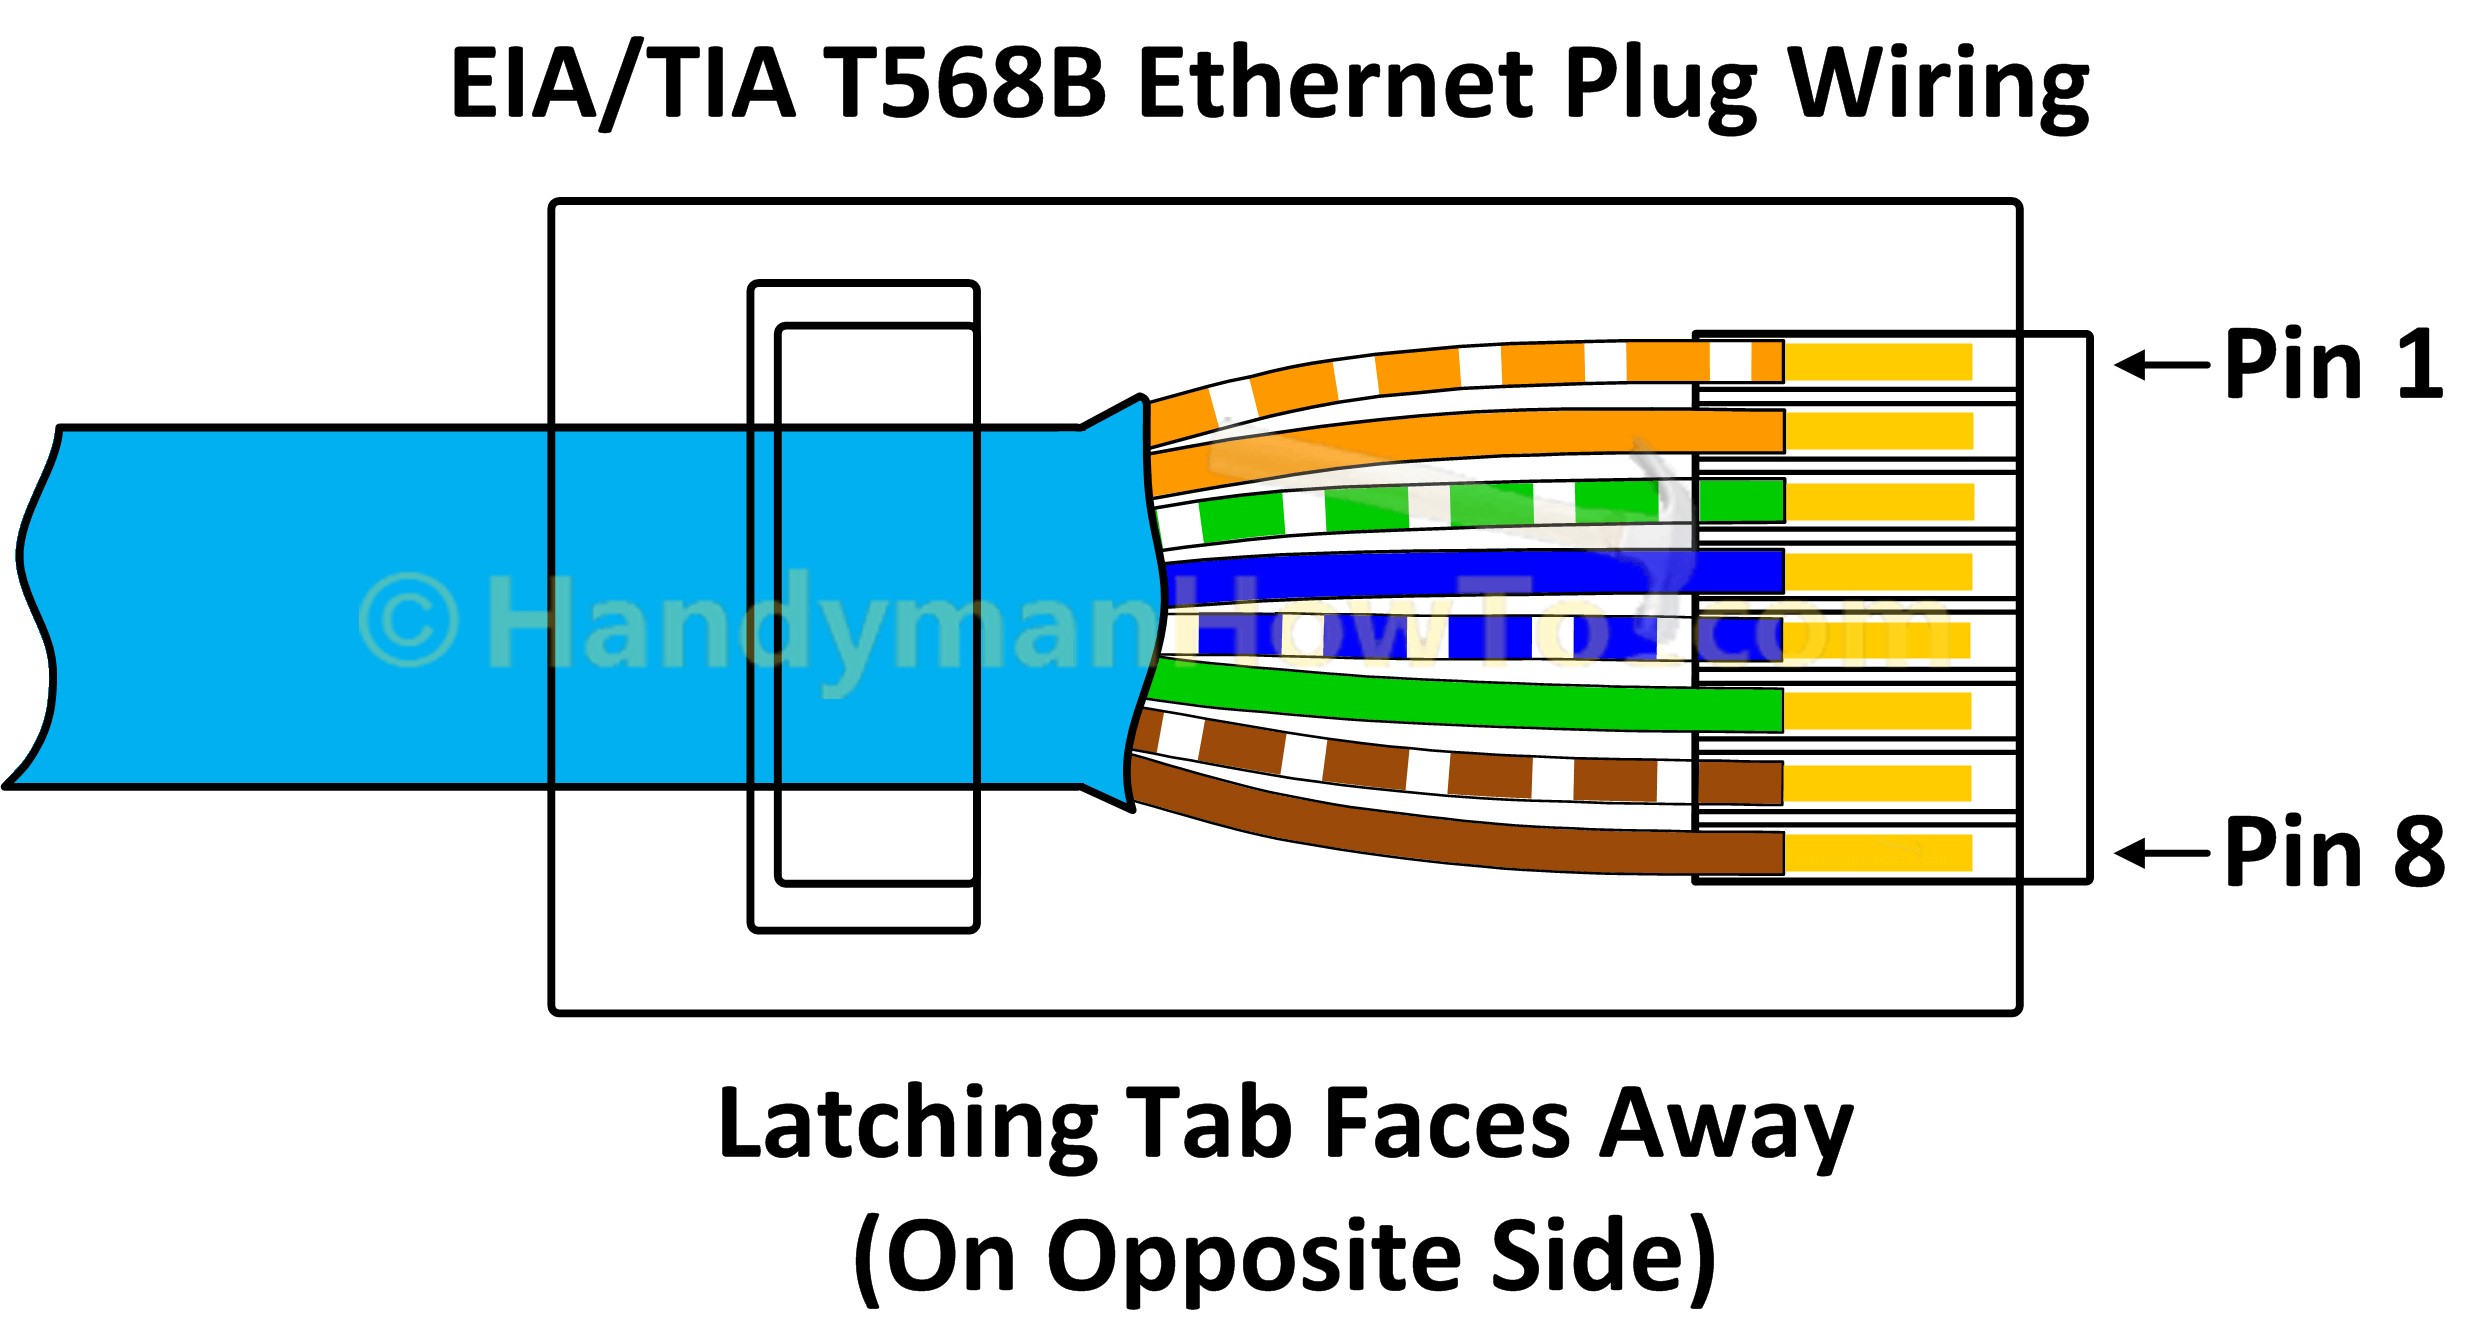 How To Make An Ethernet Network Cable Cat5e Cat6 New Wiring Best Cat 5e Diagram Ethernet Wiring Diagram